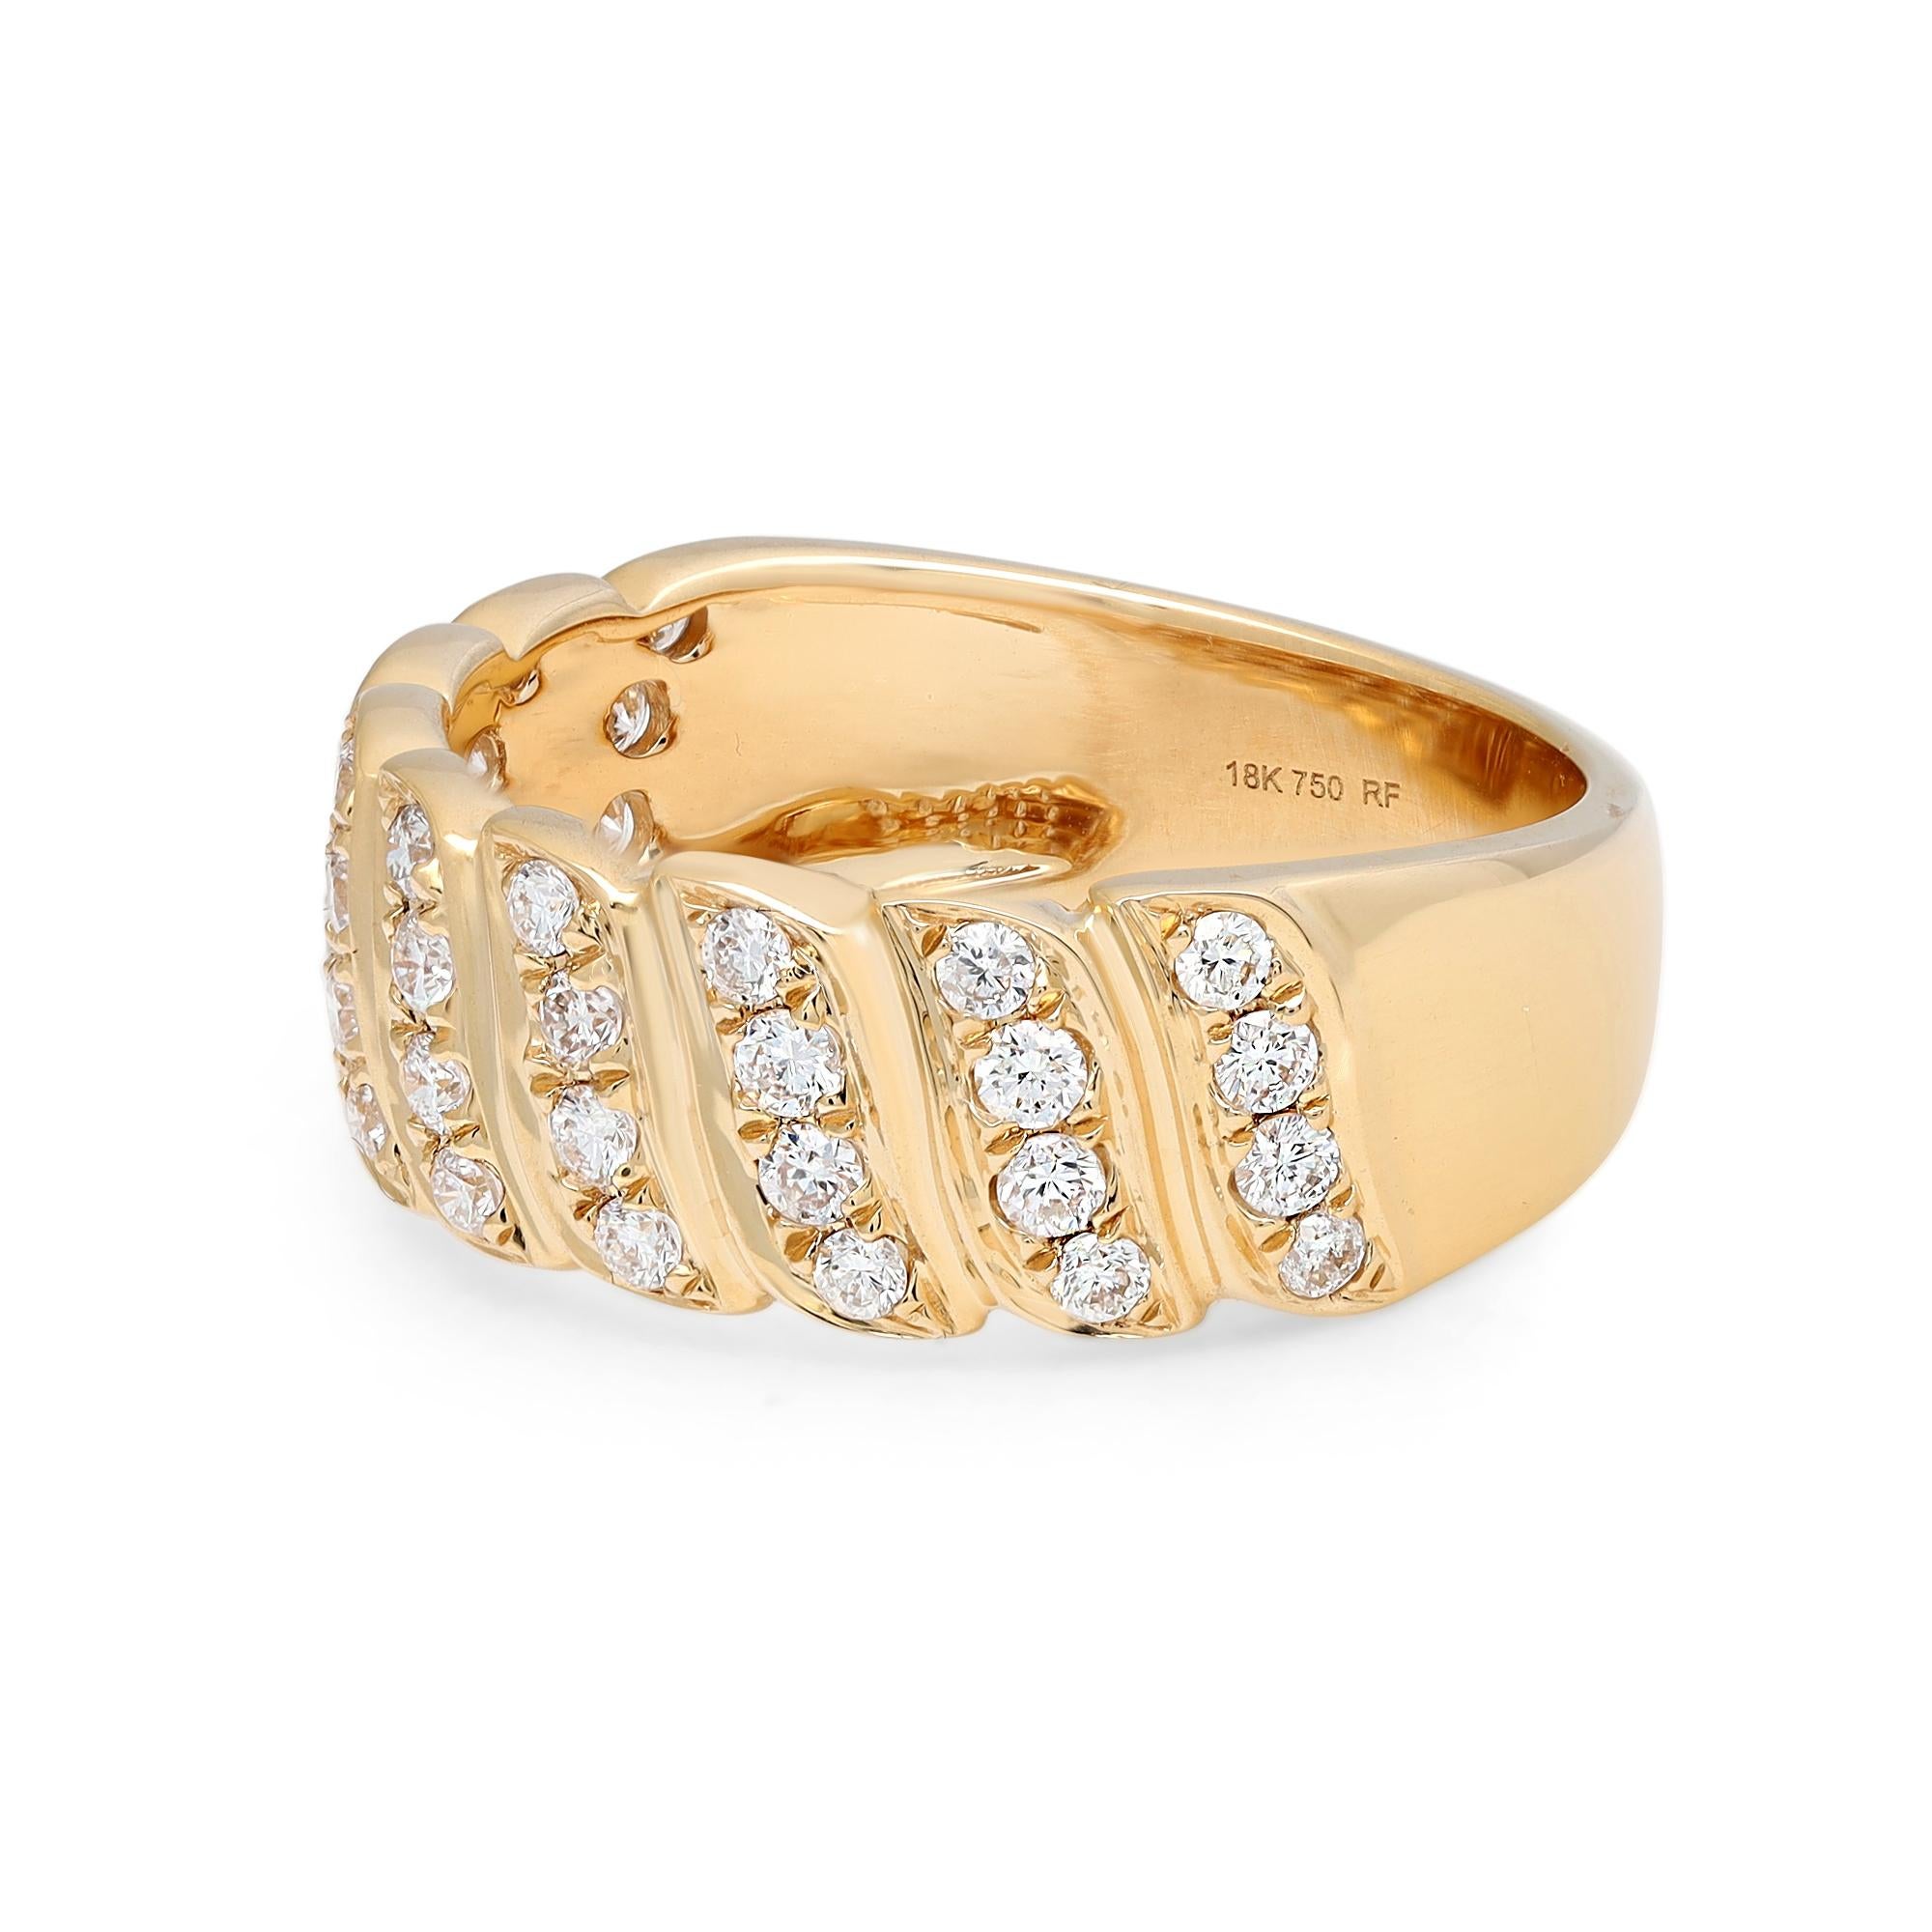 This timeless and stylish diamond band ring is crafted in 18k yellow gold and features 36 pave set dazzling round brilliant cut diamonds weighing 0.52 carat. Diamond quality: G-H and clarity VS-SI. A spectacular symbol of love, perfect for a gift or